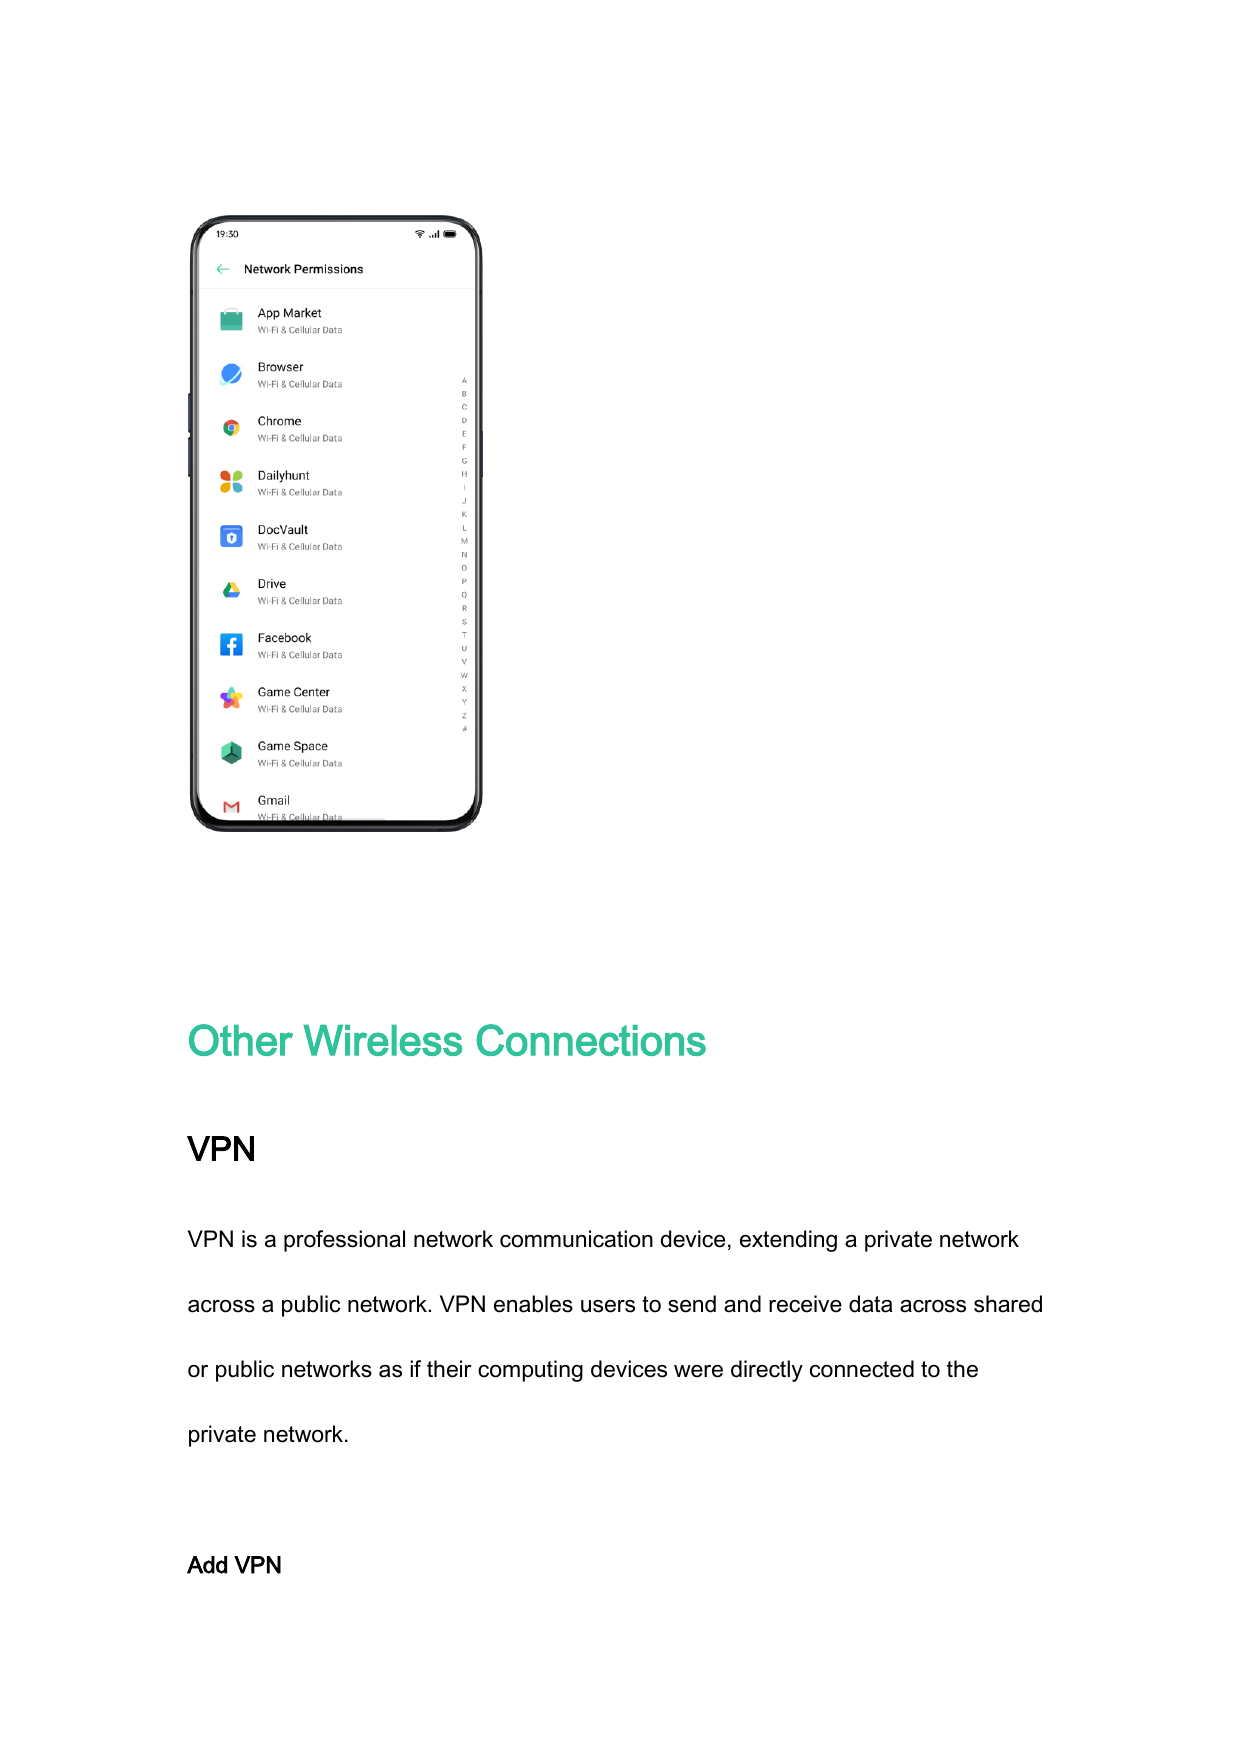 Other Wireless ConnectionsVPNVPN is a professional network communication device, extending a private networkacross a public netw